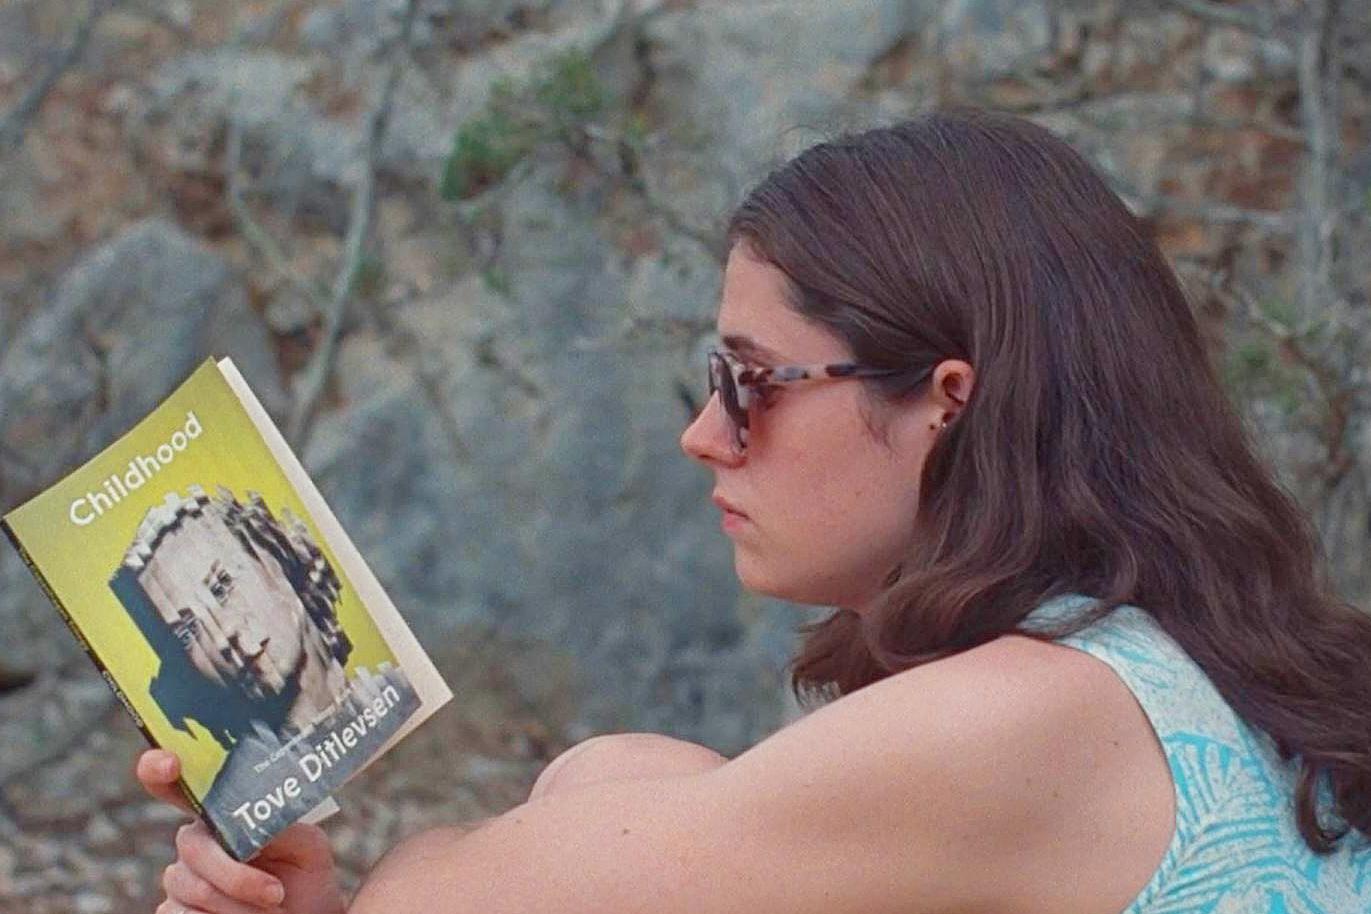 Frances reading in Hulu’s adaptation of Sally Rooney’s novel “Conversations With Friends.”